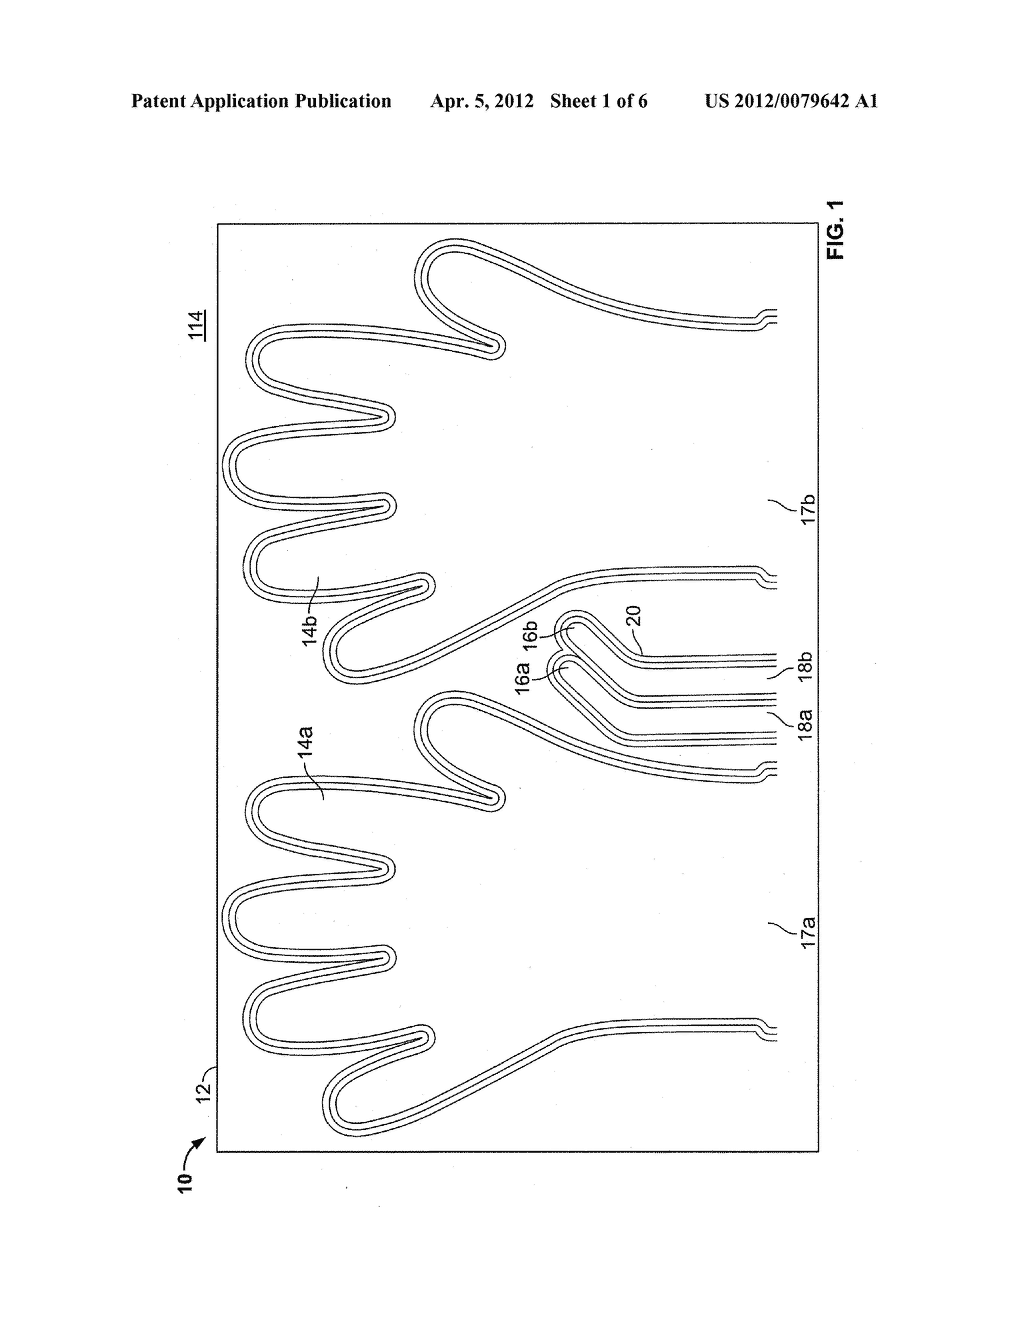 PROTECTING EYE GLASS ARMS DURING HAIR DYE PROCESS, AND PROVIDING LAMINATED     GLOVES ONE OVER THE OTHER OF THE SAME HAND SIZE - diagram, schematic, and image 02